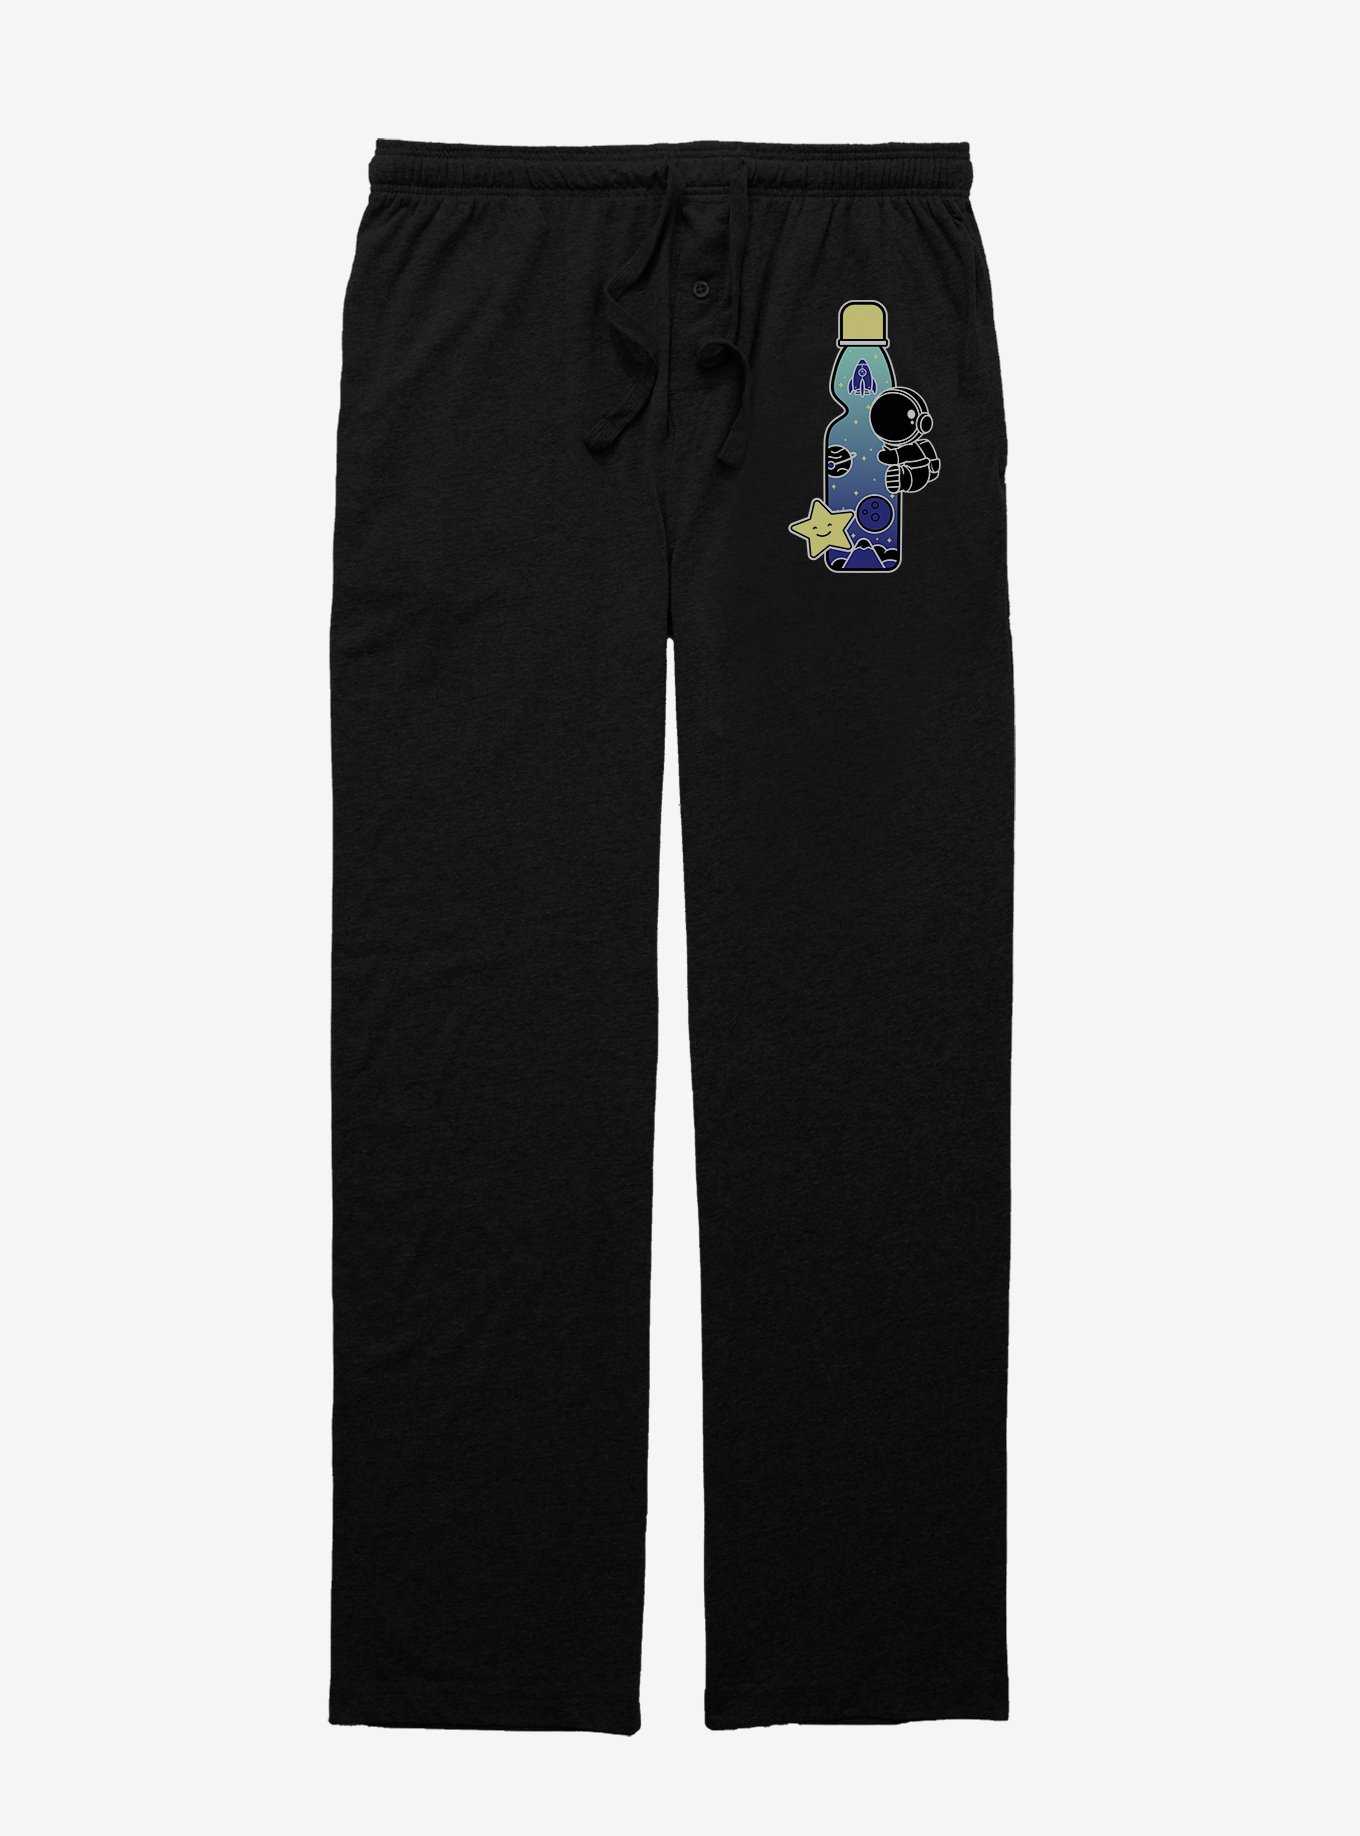 Space Out Soda Bottle Pajama Pants, , hi-res